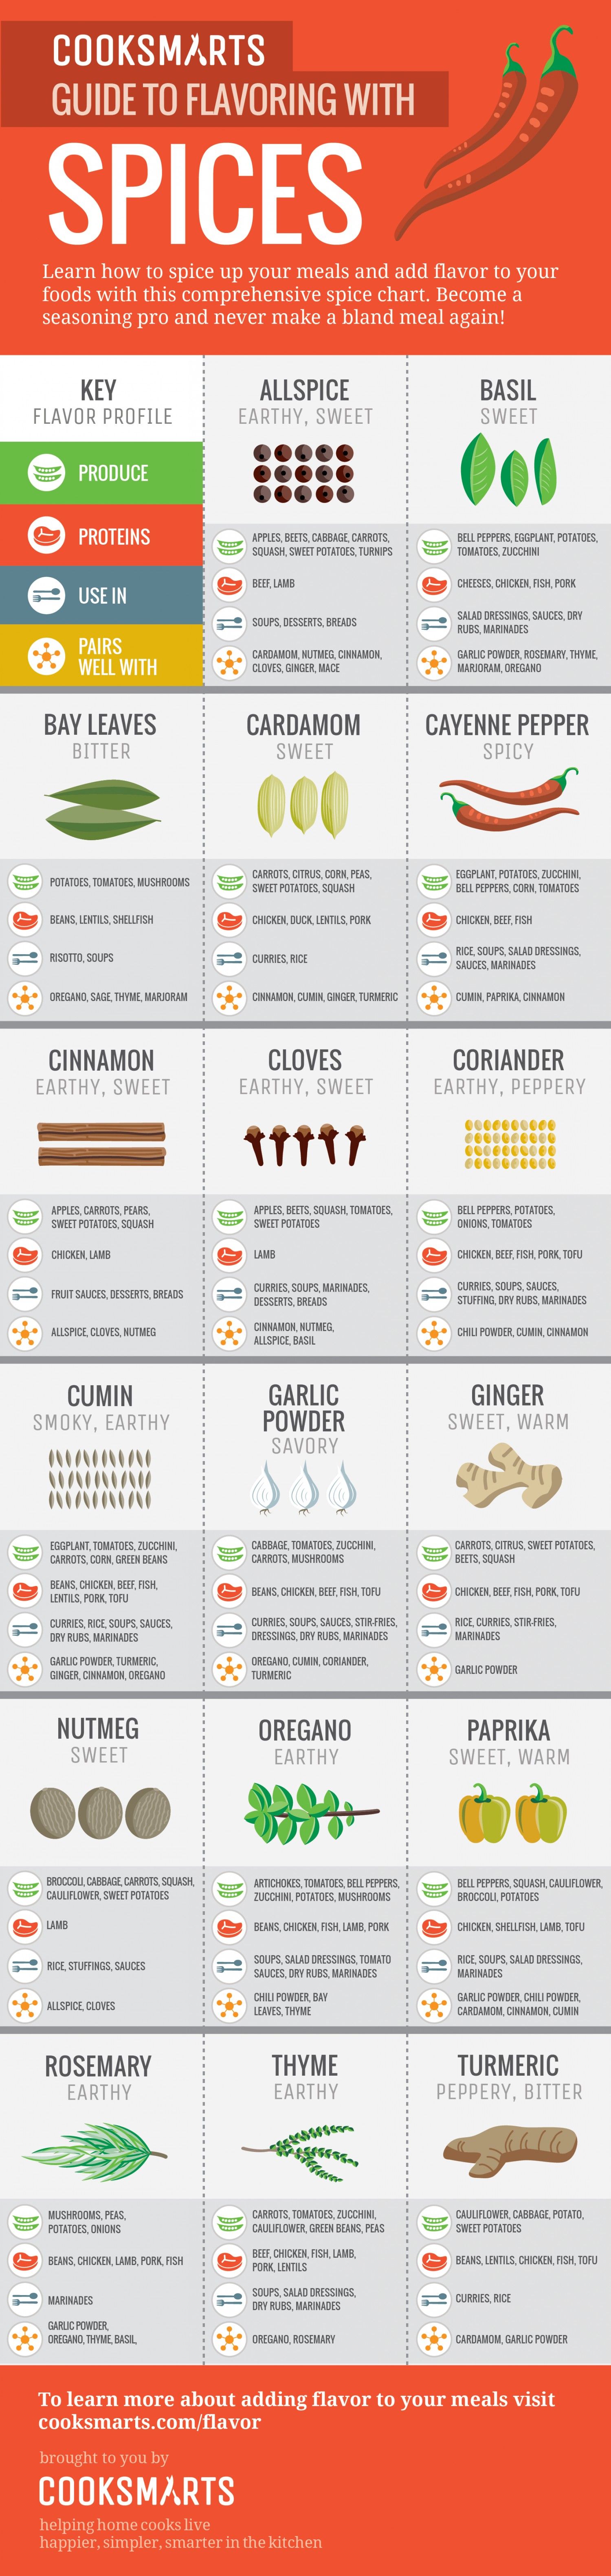 Guide to Flavoring with Spices (vertical)